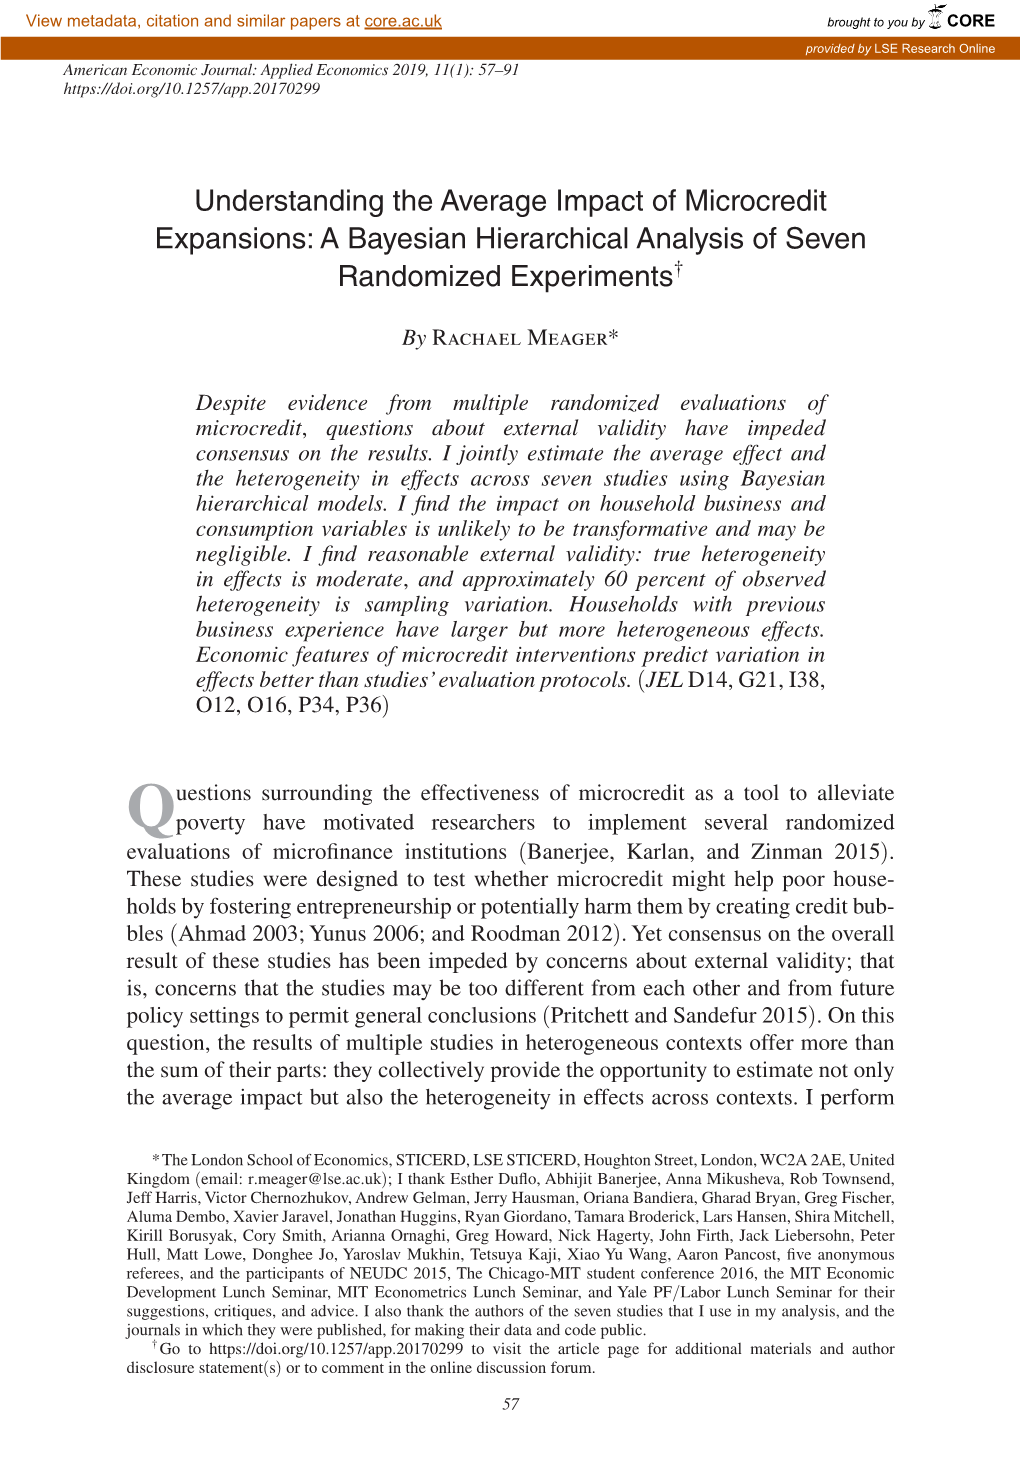 Understanding the Average Impact of Microcredit Expansions: a Bayesian Hierarchical Analysis of Seven Randomized Experiments†